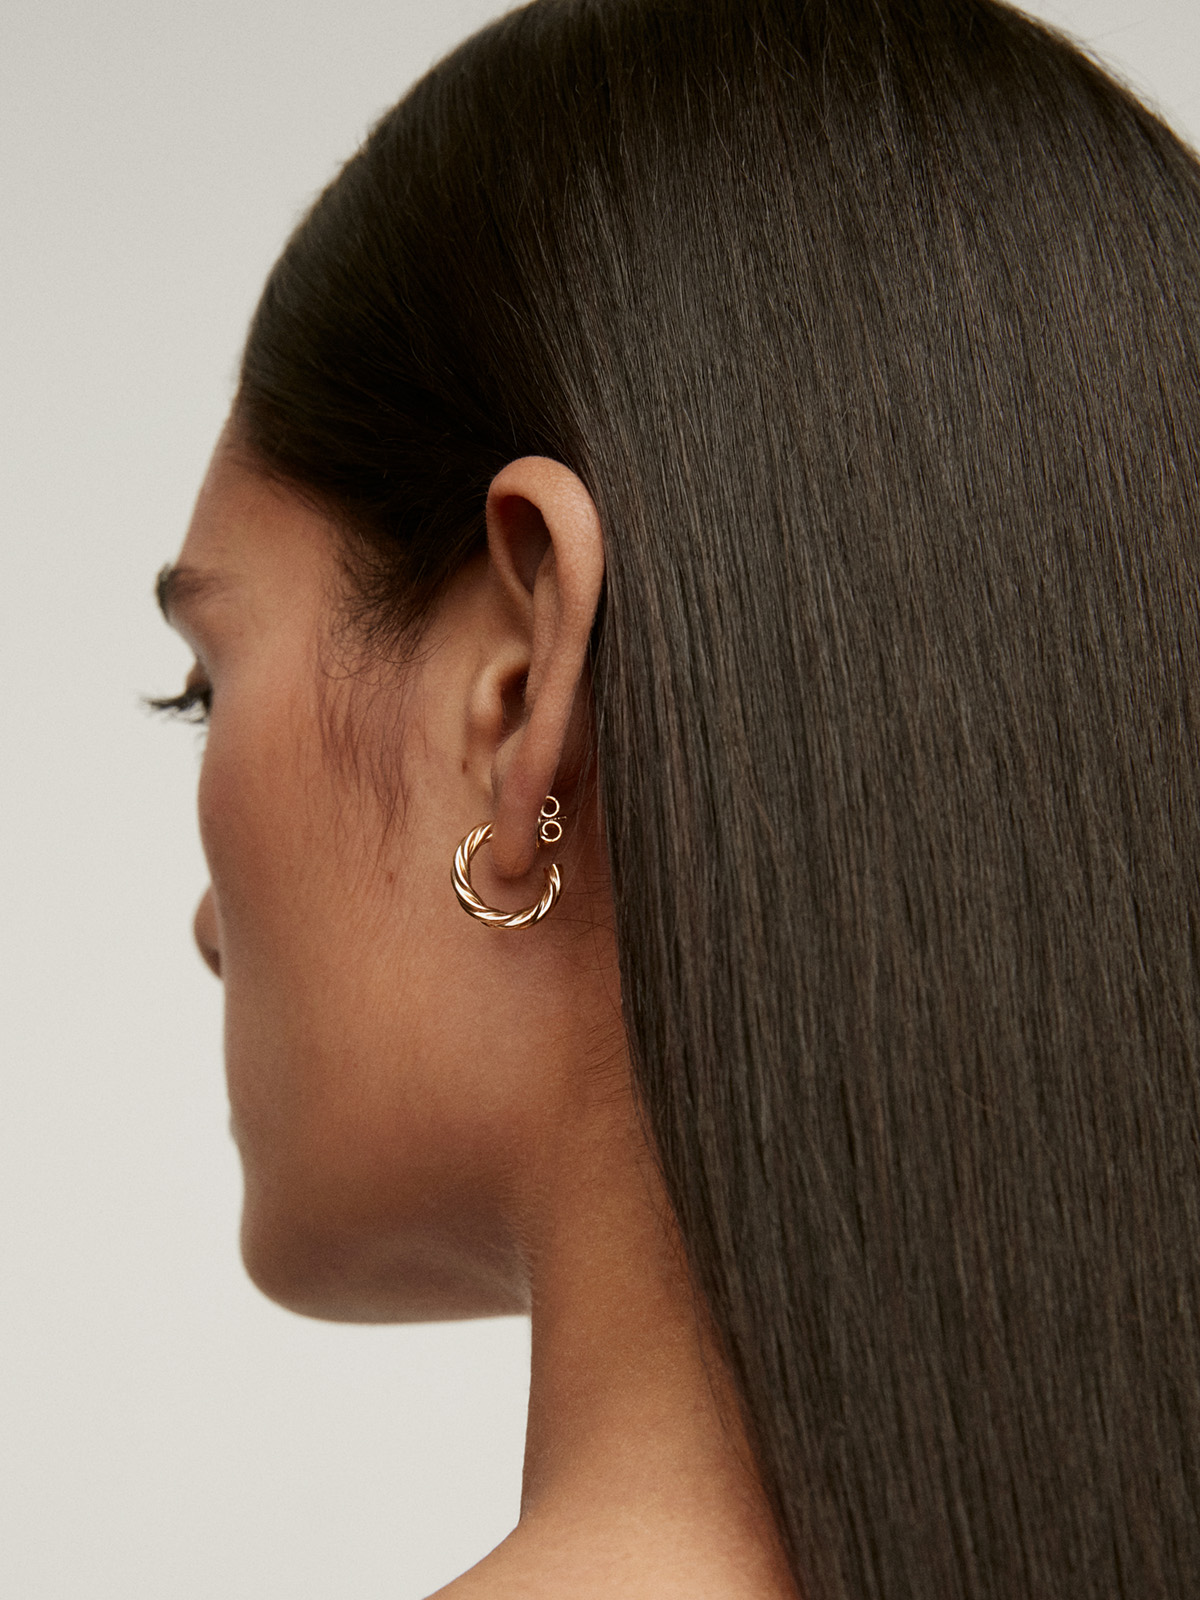 Medium hoop earrings made of 925 silver covered in 18k gold with fluted texture.